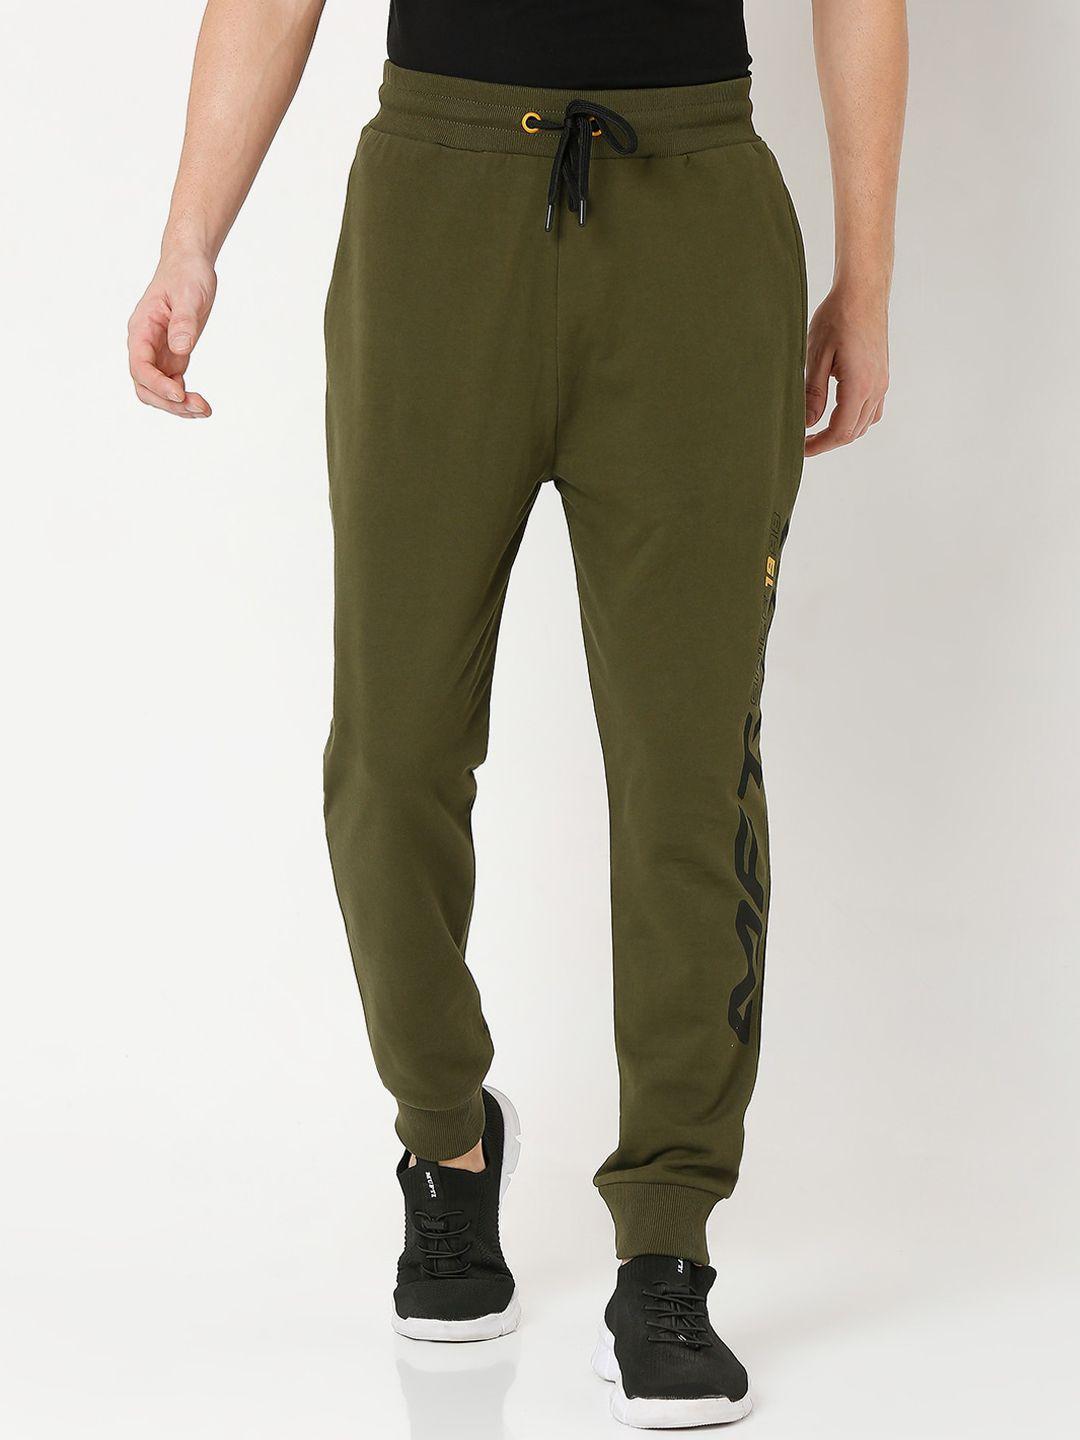 mufti-men-olive-green-loose-fit-joggers-trousers